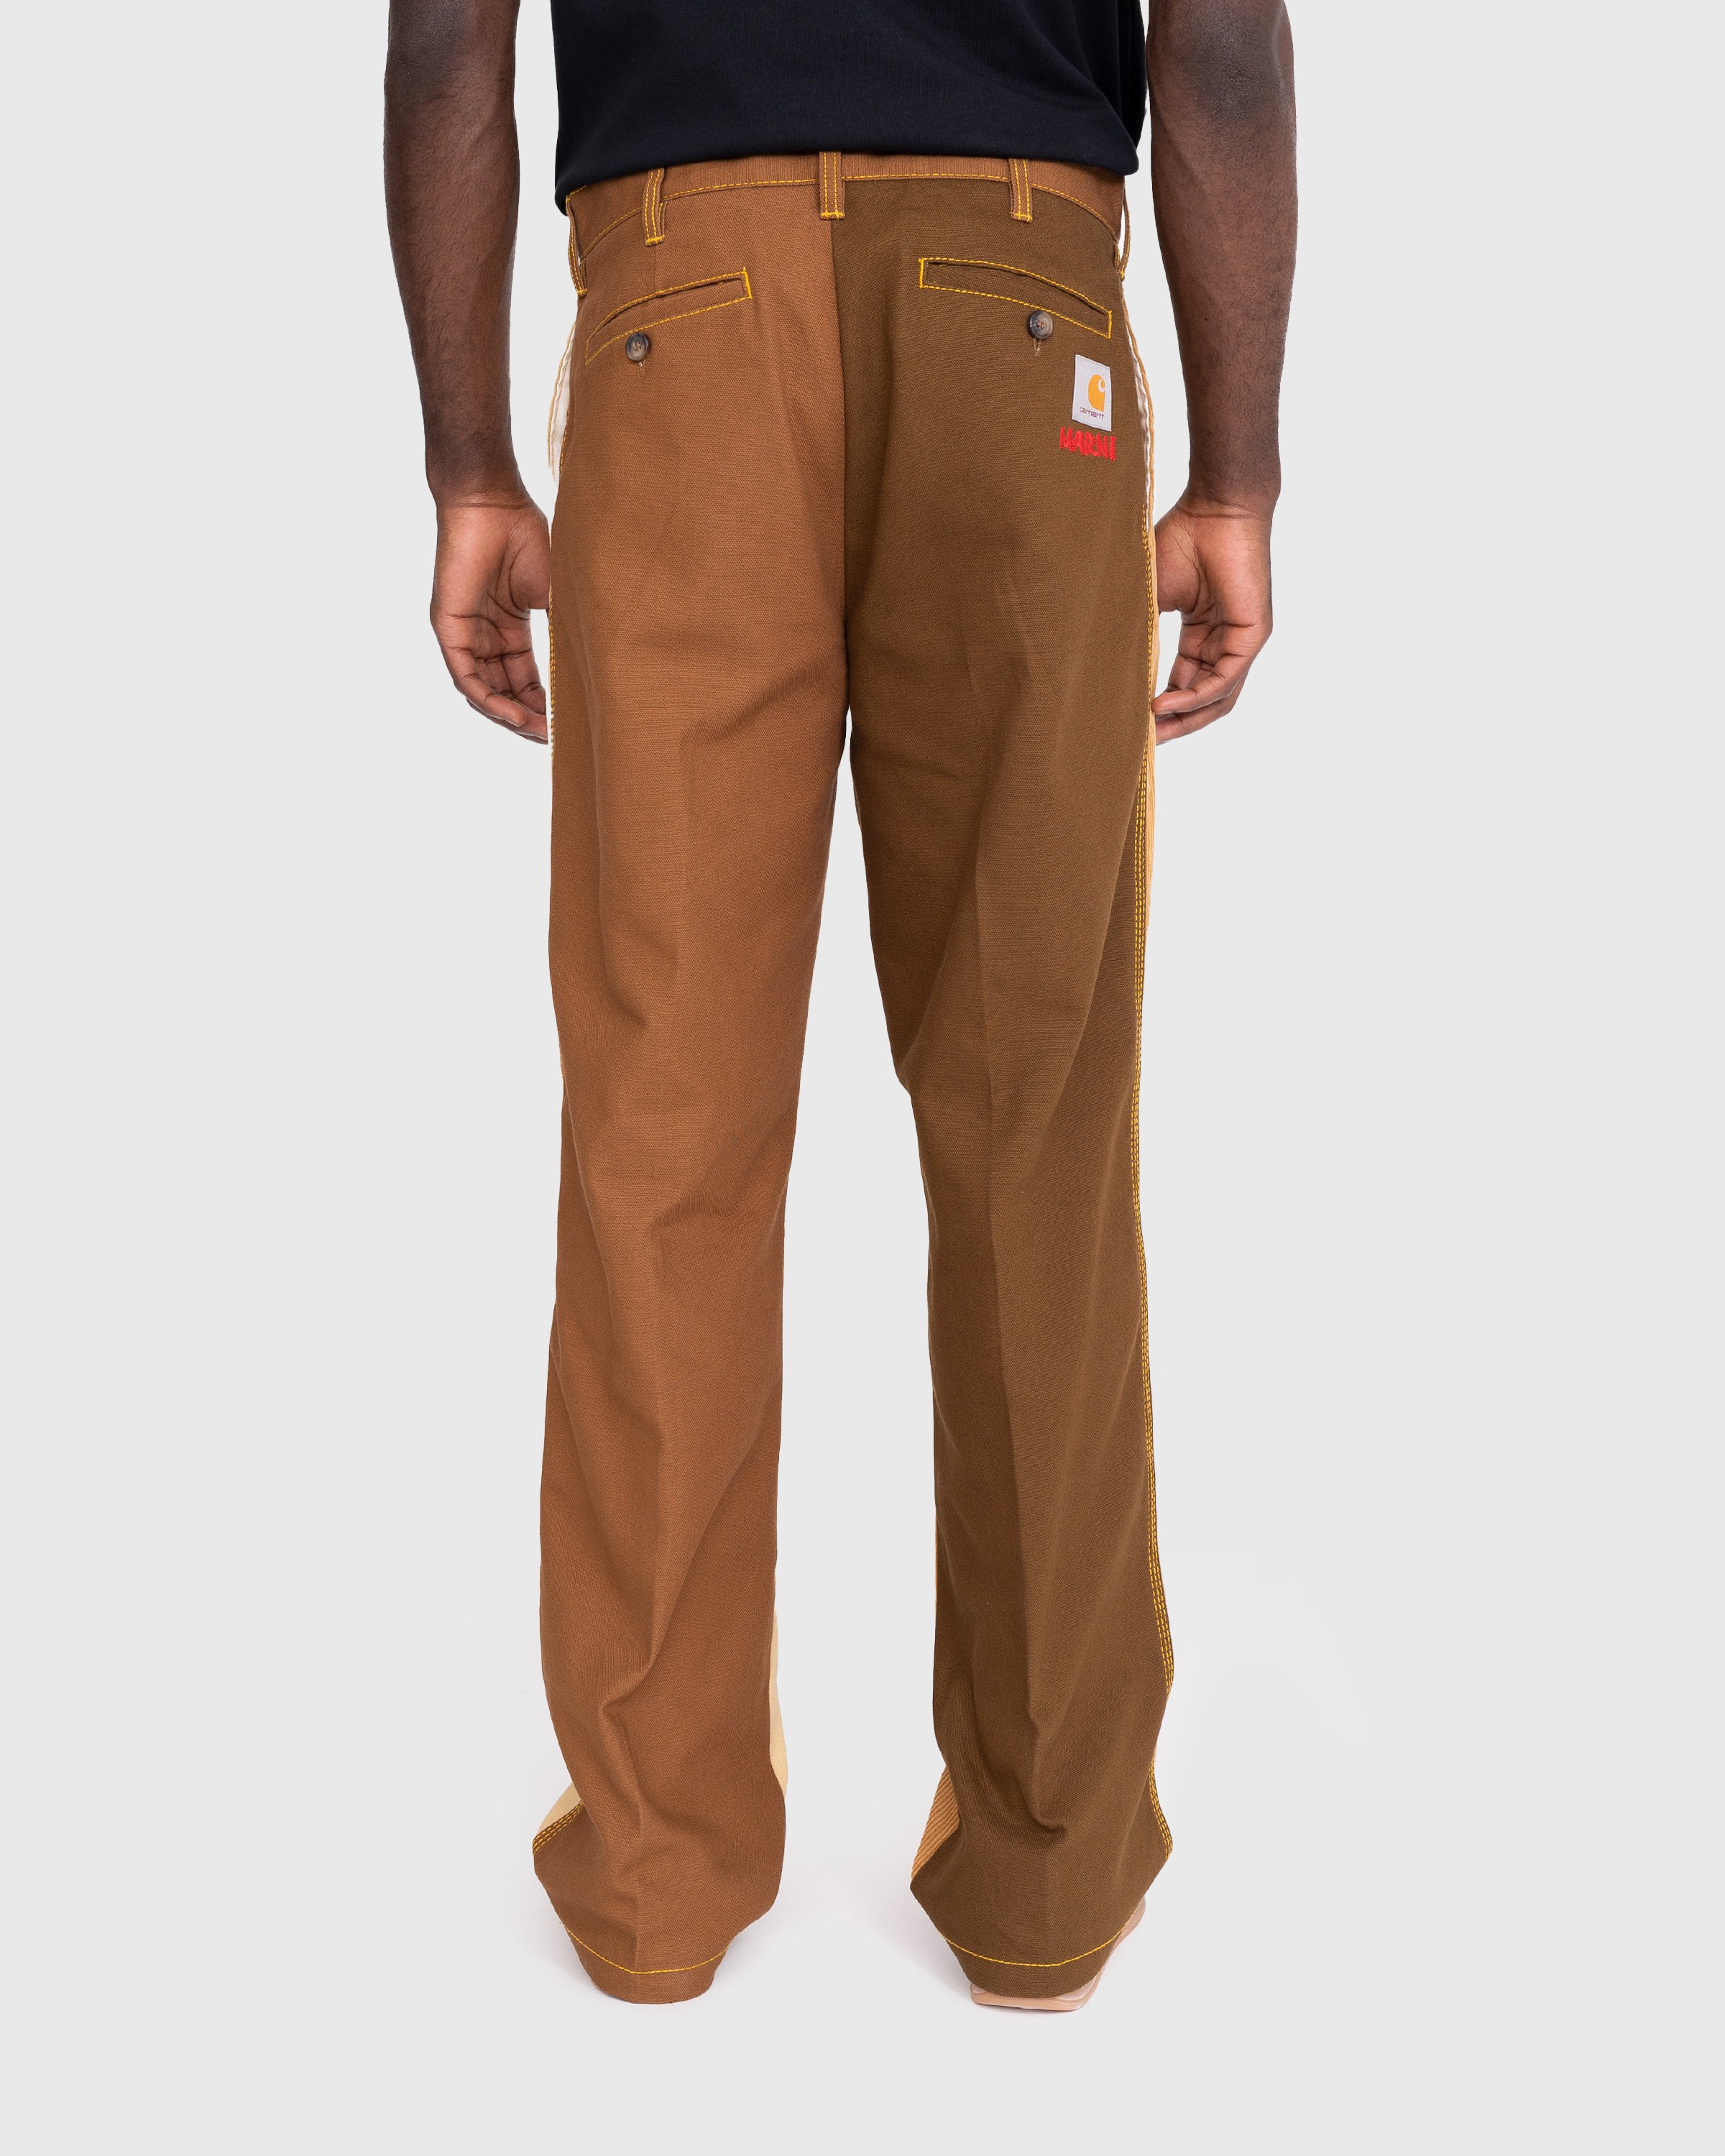 Marni x Carhartt WIP - Colorblocked Trousers Brown - Clothing - Brown - Image 4